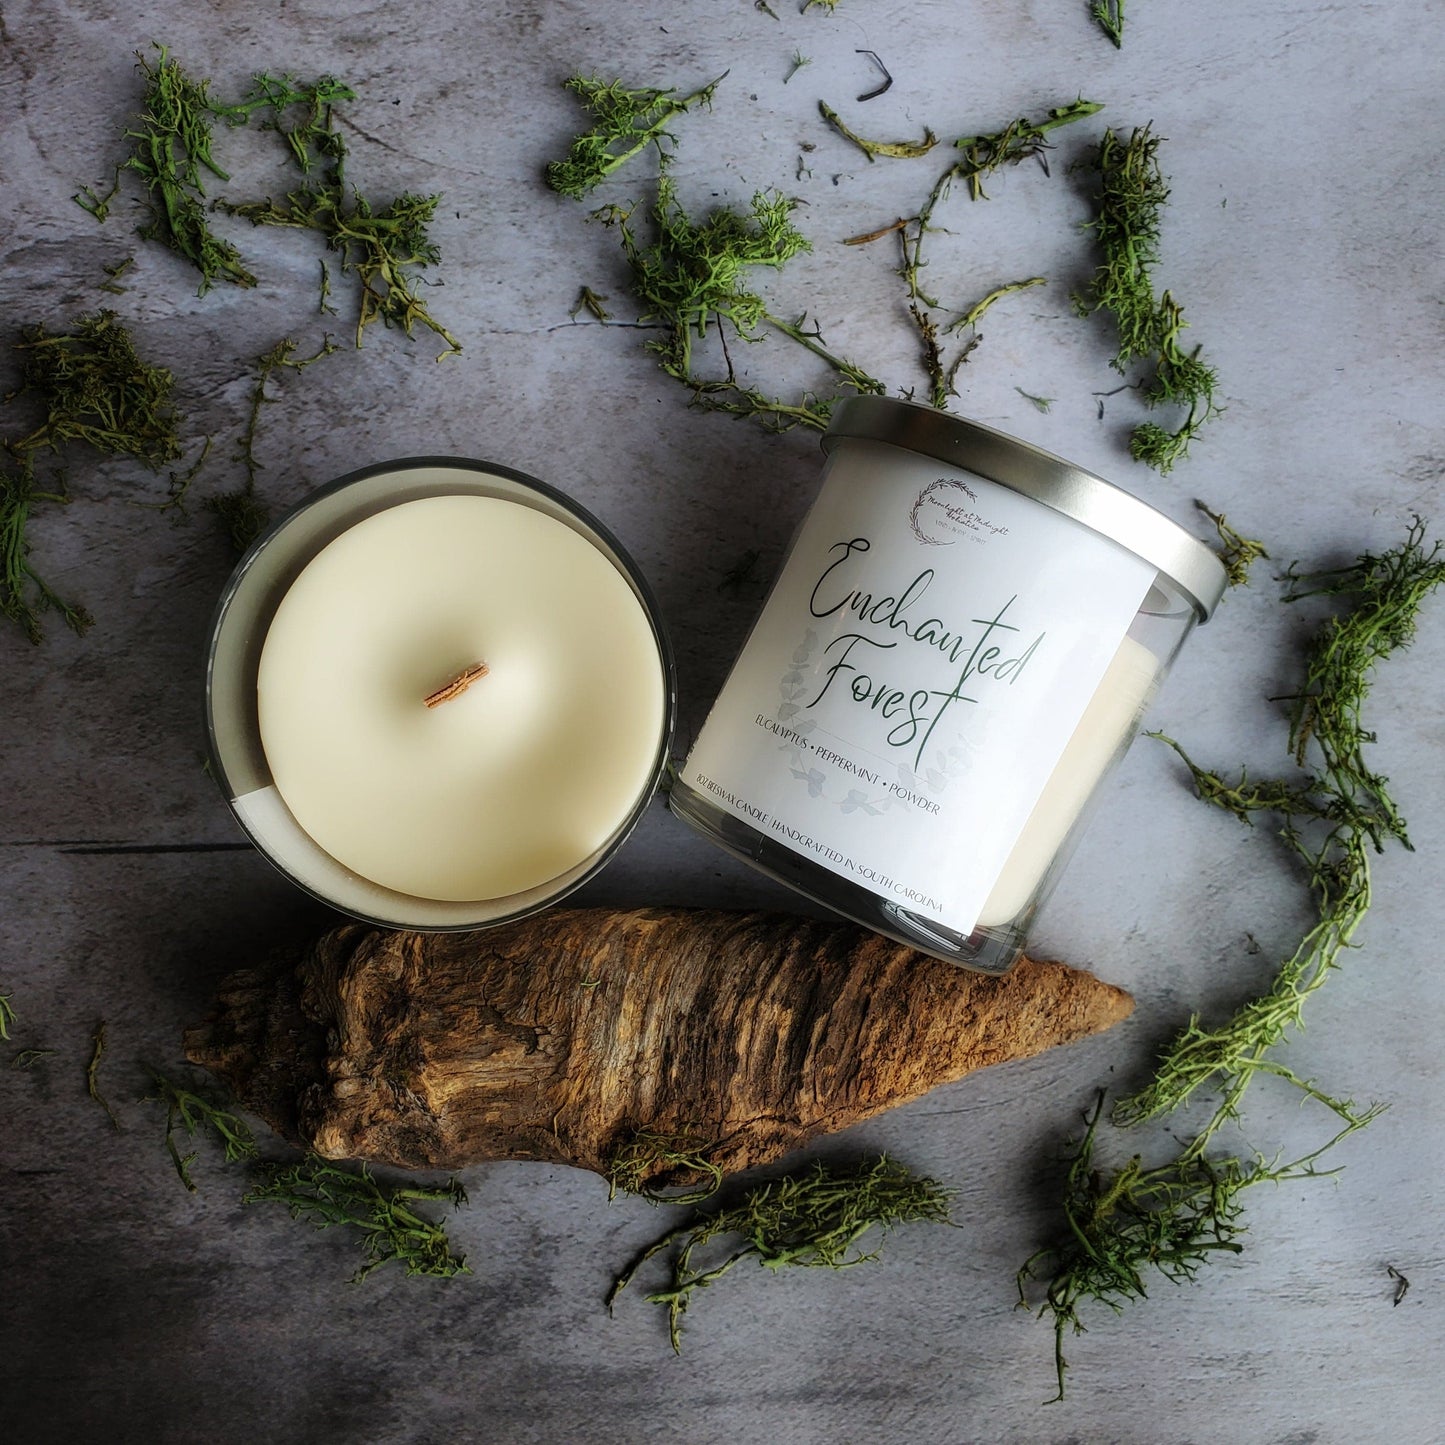 ENCHANTED FOREST | 8 oz Beeswax Candle | Eucalyptus Peppermint Candle | Tumbler Jar Candle | Handmade Wood Wick Candle | Magical Home Decor